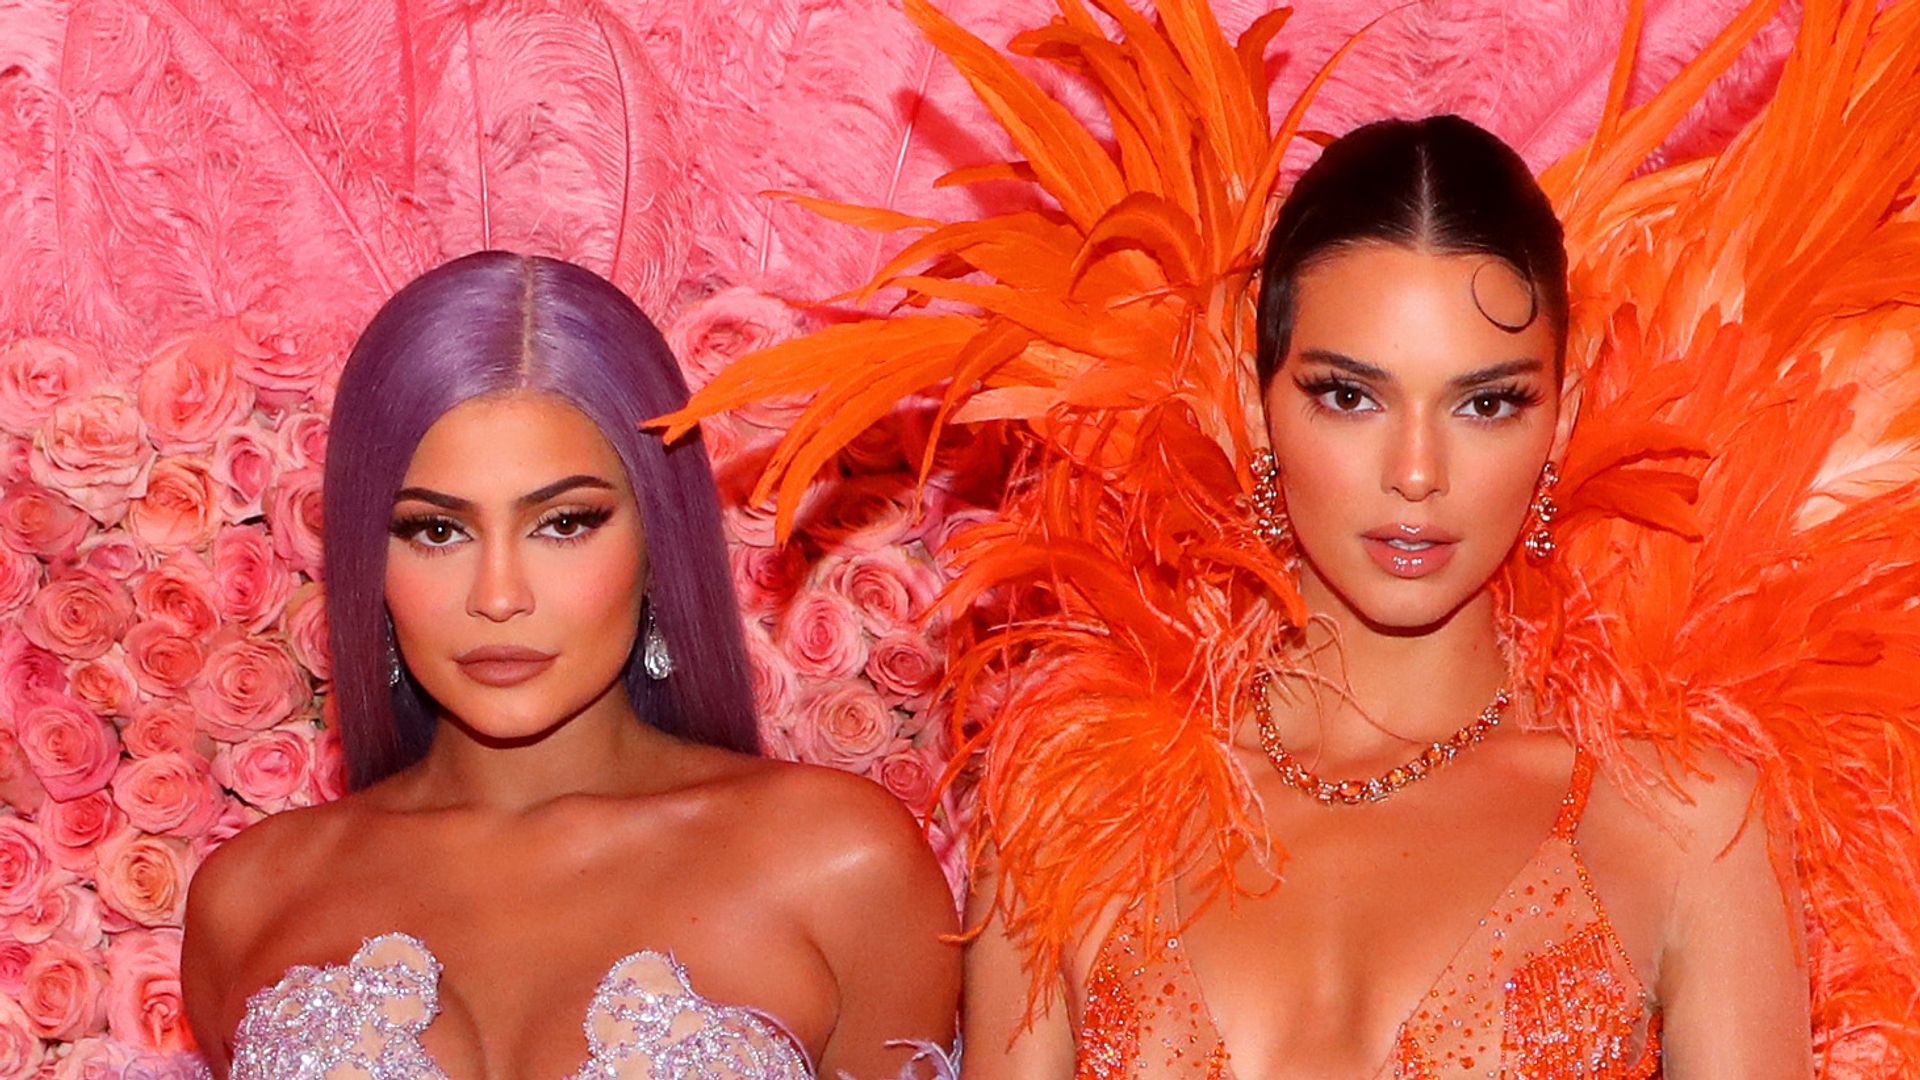 NEW YORK, NEW YORK - MAY 06: Kylie Jenner and Kendall Jenner attend The 2019 Met Gala Celebrating Camp: Notes on Fashion at Metropolitan Museum of Art on May 06, 2019 in New York City. (Photo by Kevin Tachman/MG19/Getty Images for The Met Museum/Vogue)